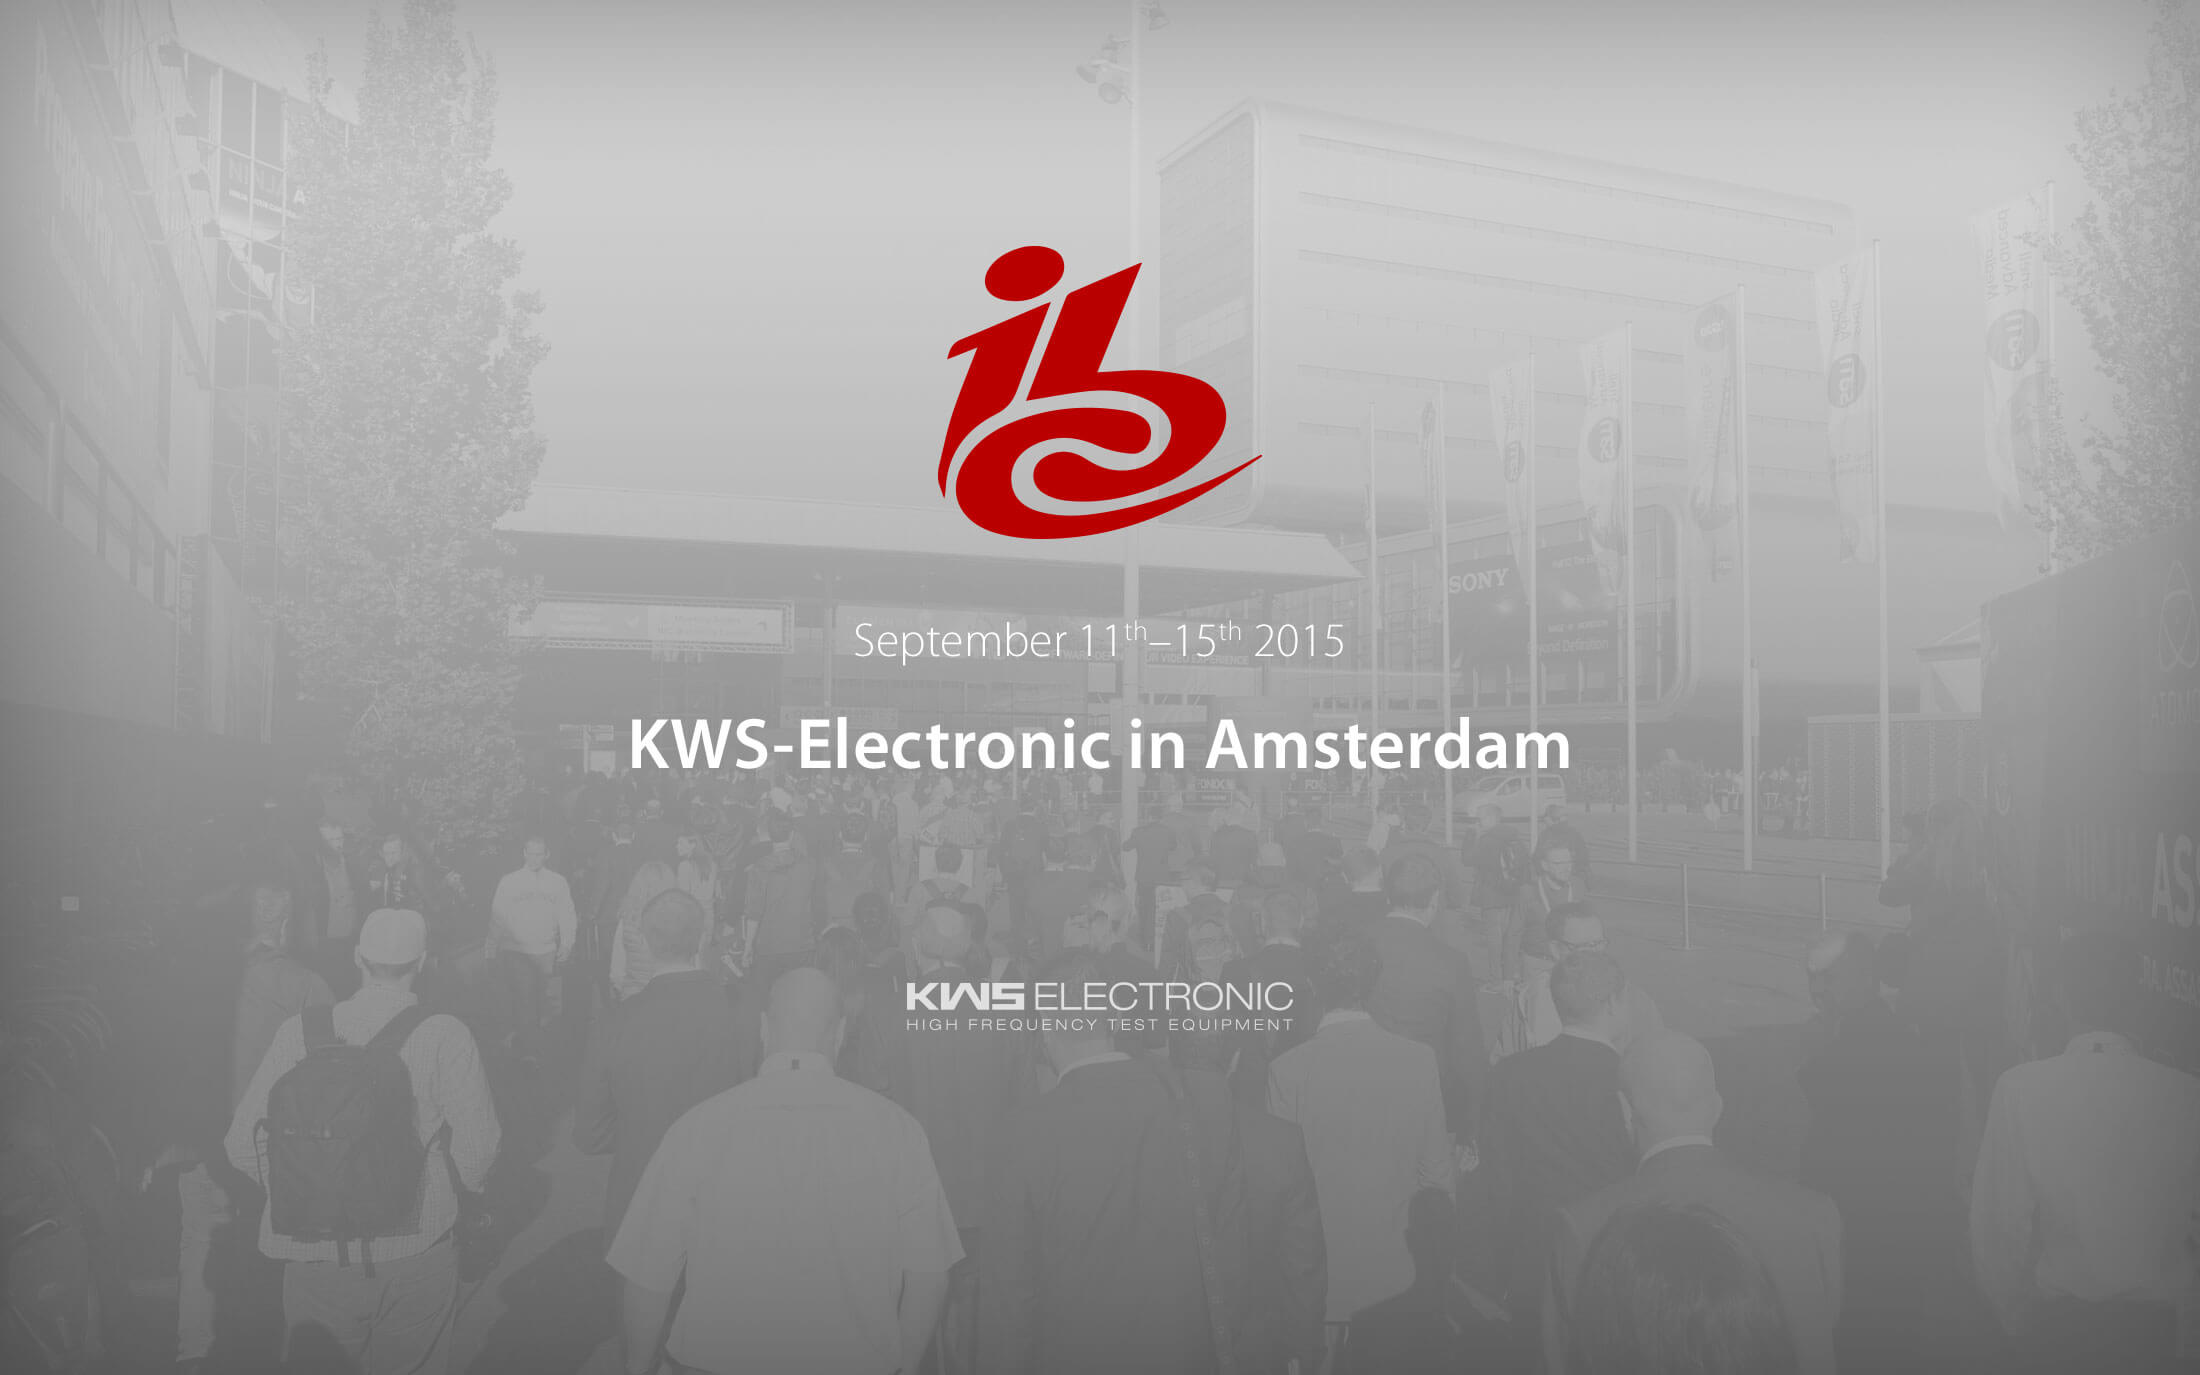 KWS Electronic at ibc 2015 in amsterdam